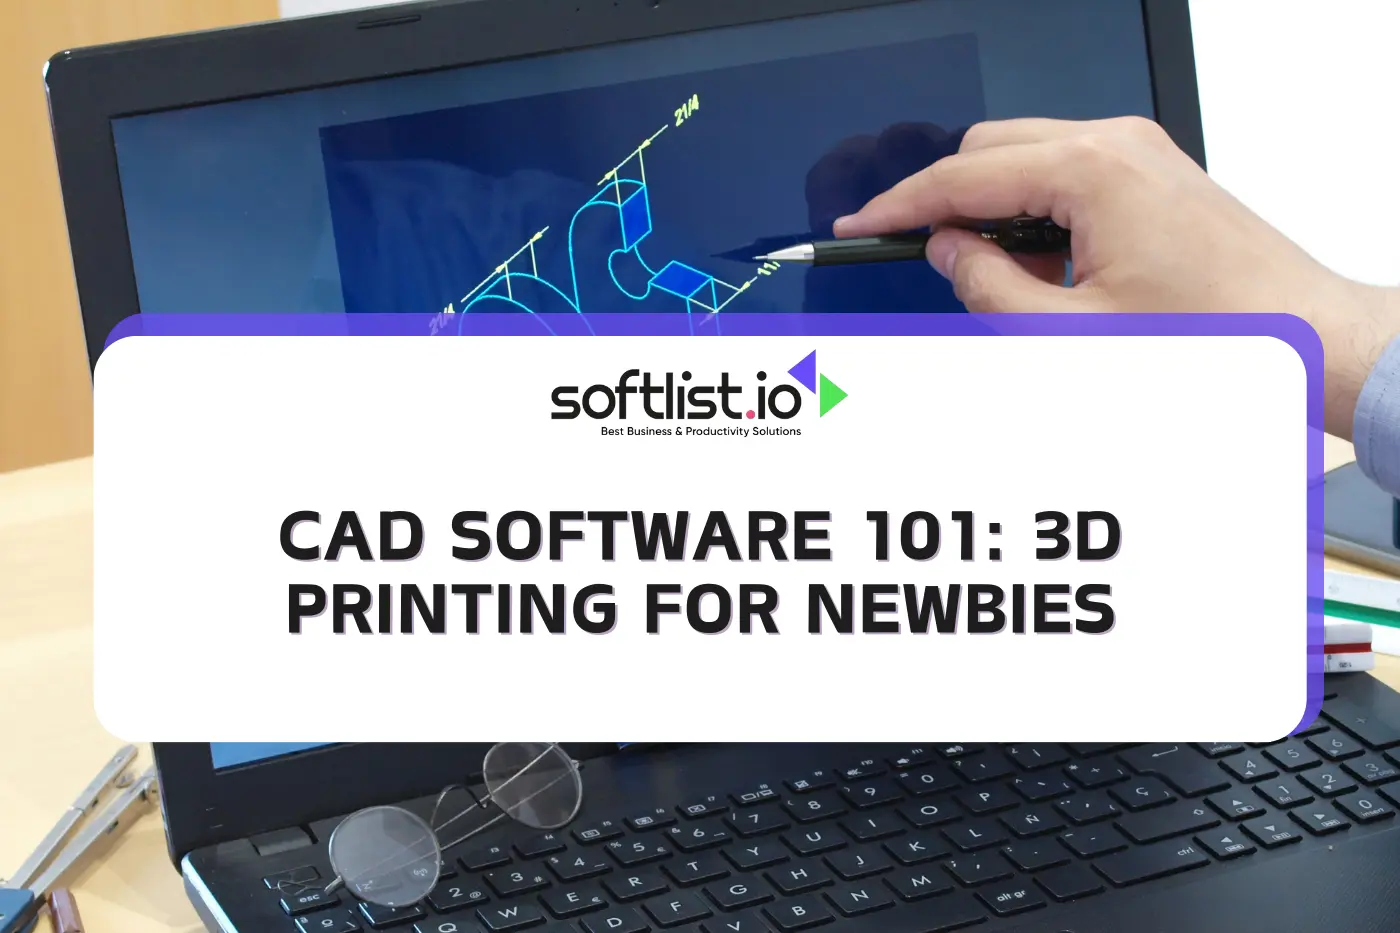 CAD Software 101 3D Printing for Newbies